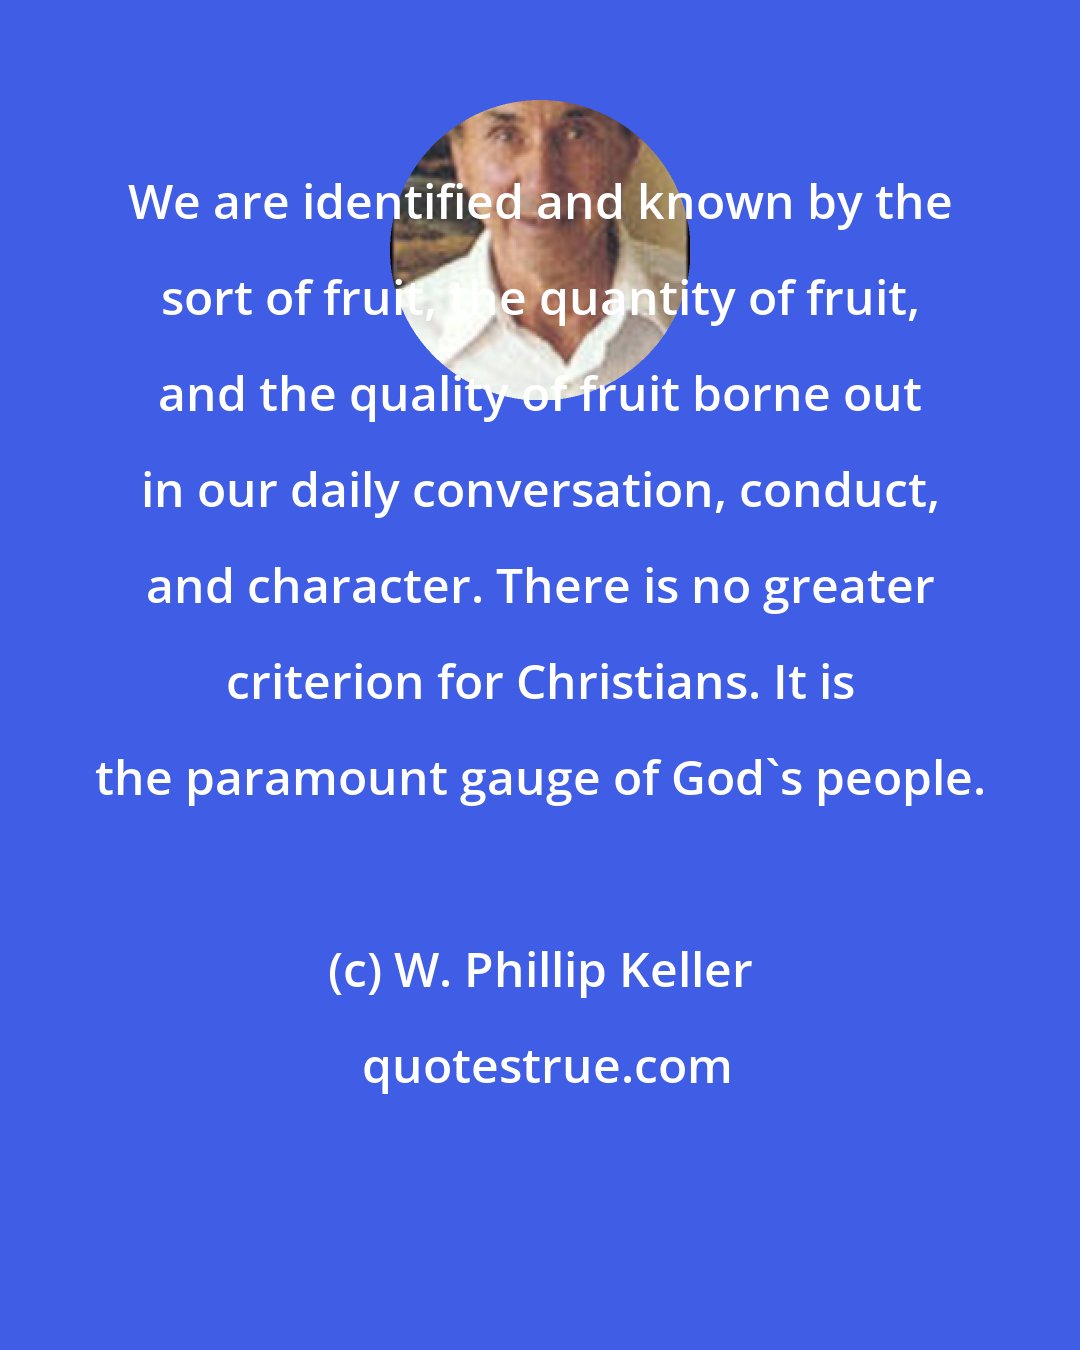 W. Phillip Keller: We are identified and known by the sort of fruit, the quantity of fruit, and the quality of fruit borne out in our daily conversation, conduct, and character. There is no greater criterion for Christians. It is the paramount gauge of God's people.